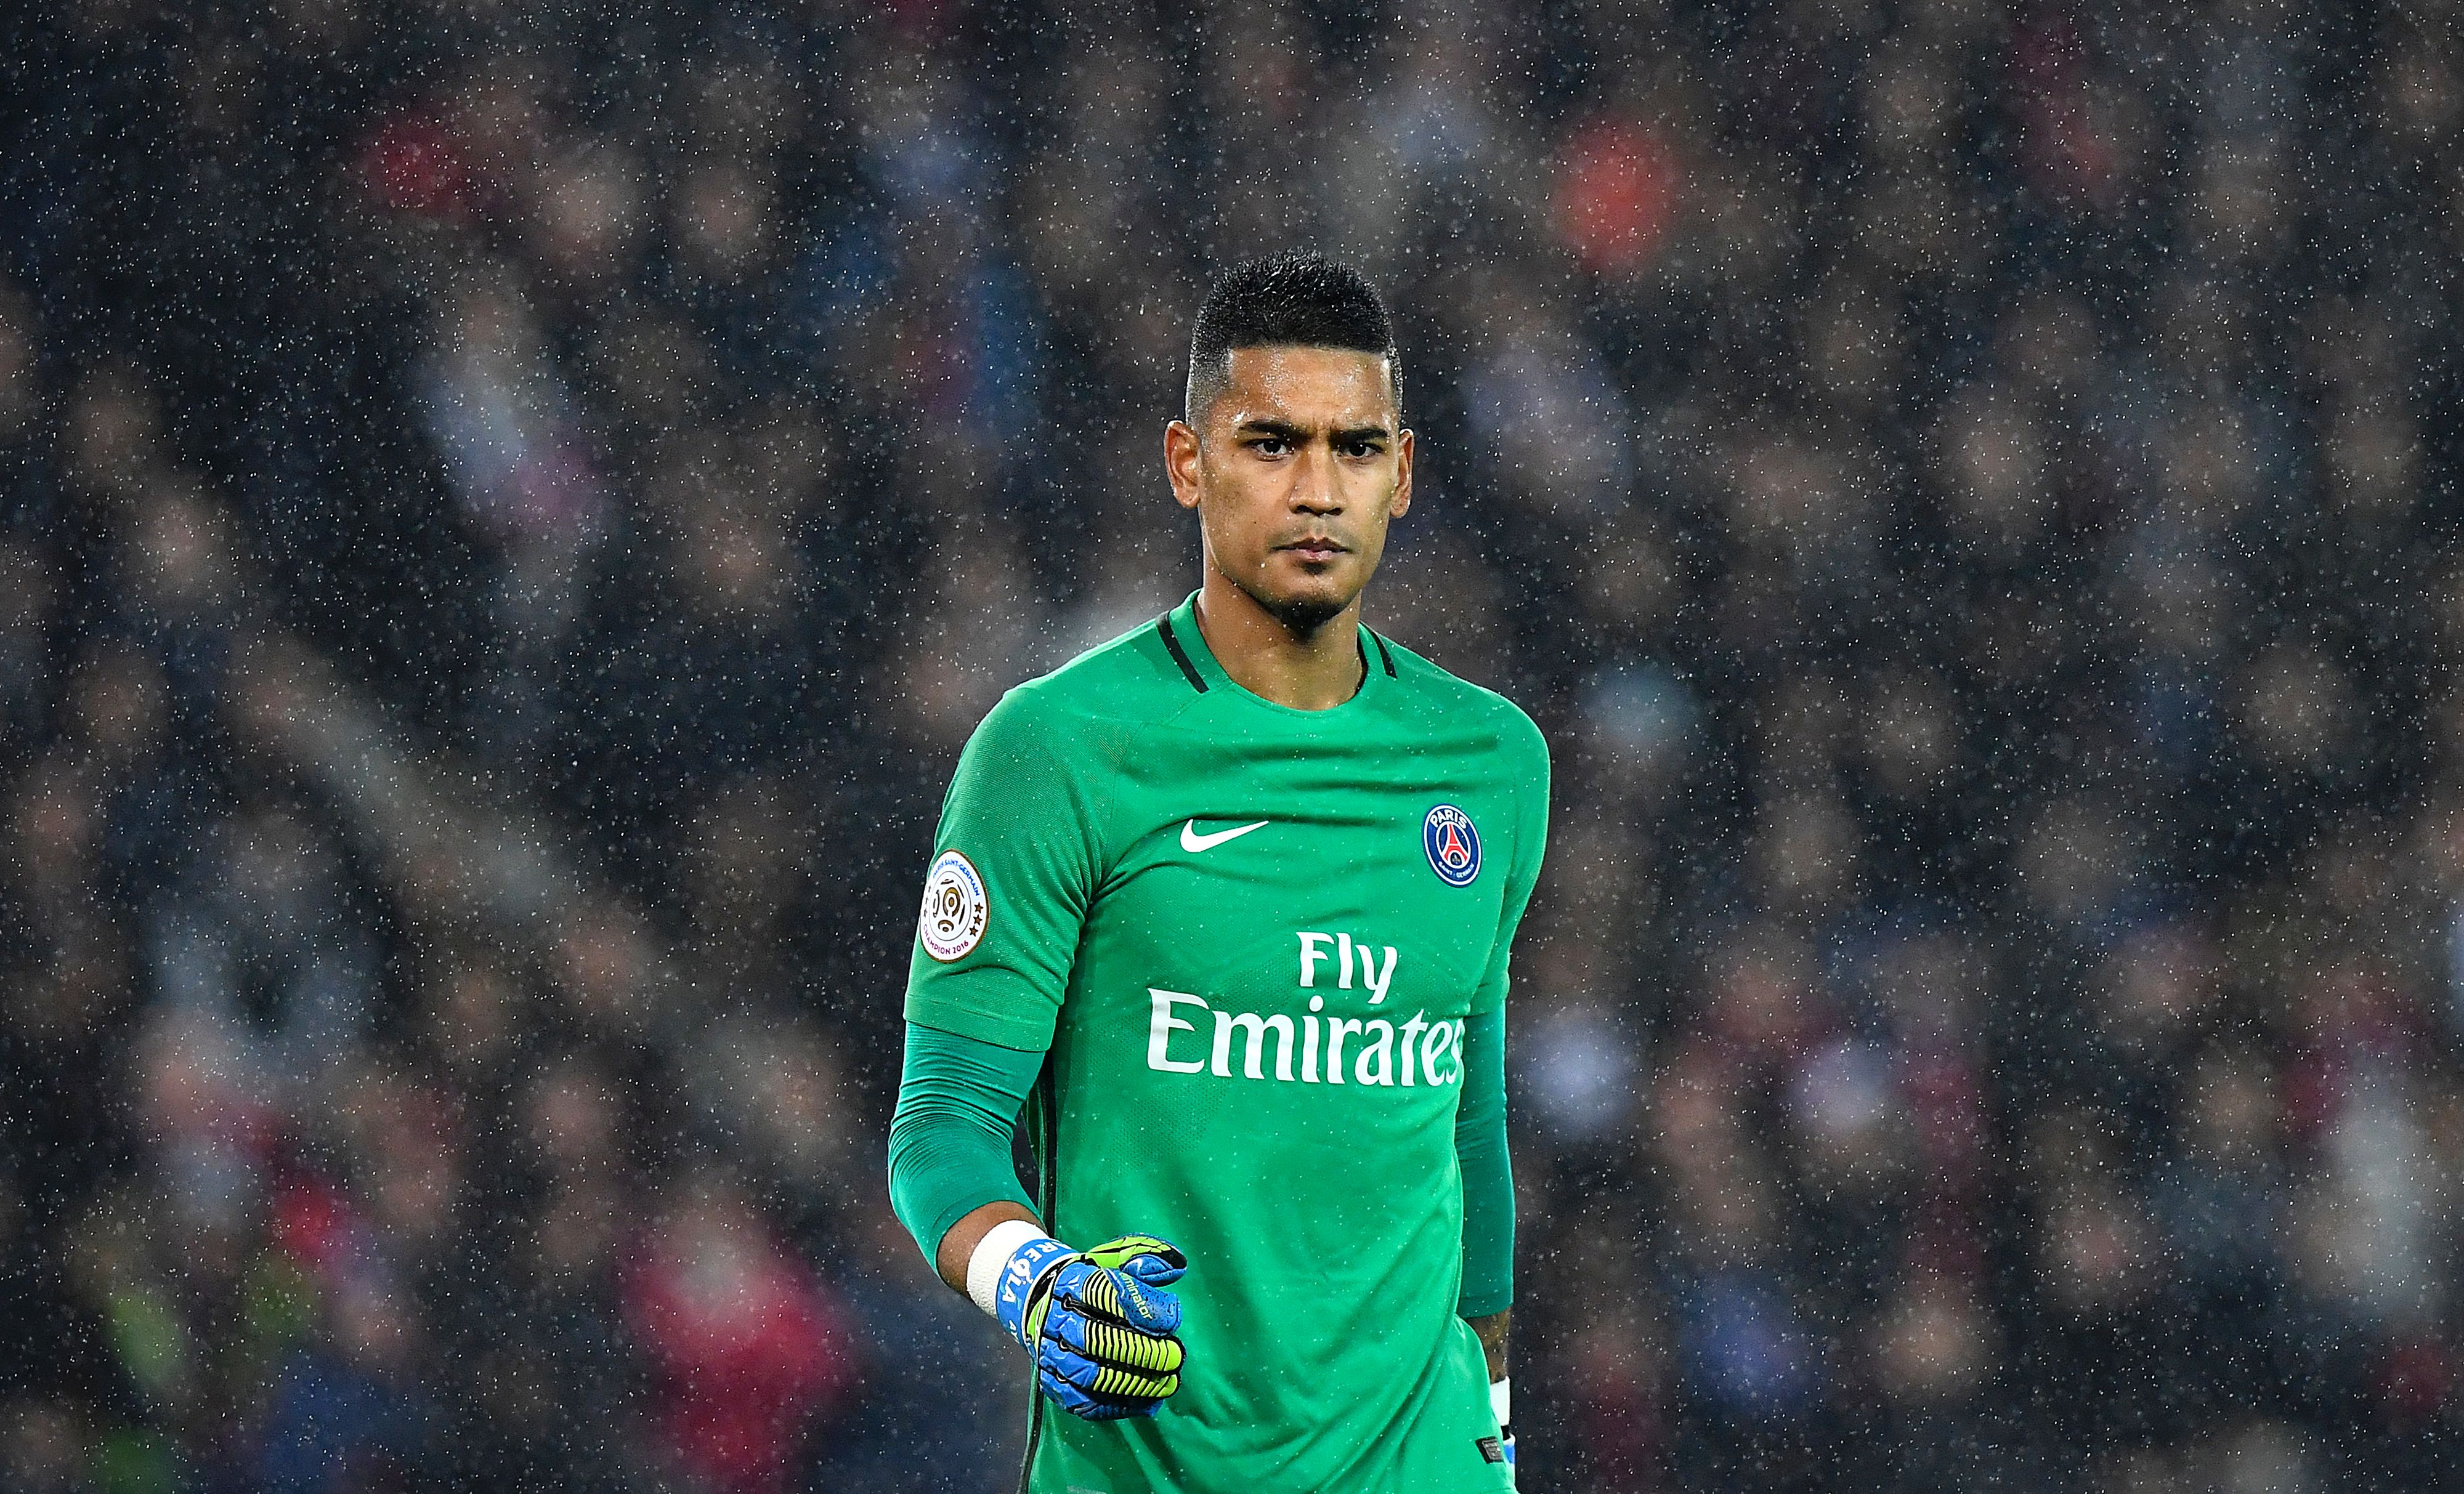 Paris Saint-Germain's French goalkeeper Alphonse Areola walks in the rain during the French L1 football match between Paris Saint-Germain and Olympique of Marseille at the Parc des Princes stadium in Paris on October 23, 2016. / AFP / FRANCK FIFE        (Photo credit should read FRANCK FIFE/AFP/Getty Images)